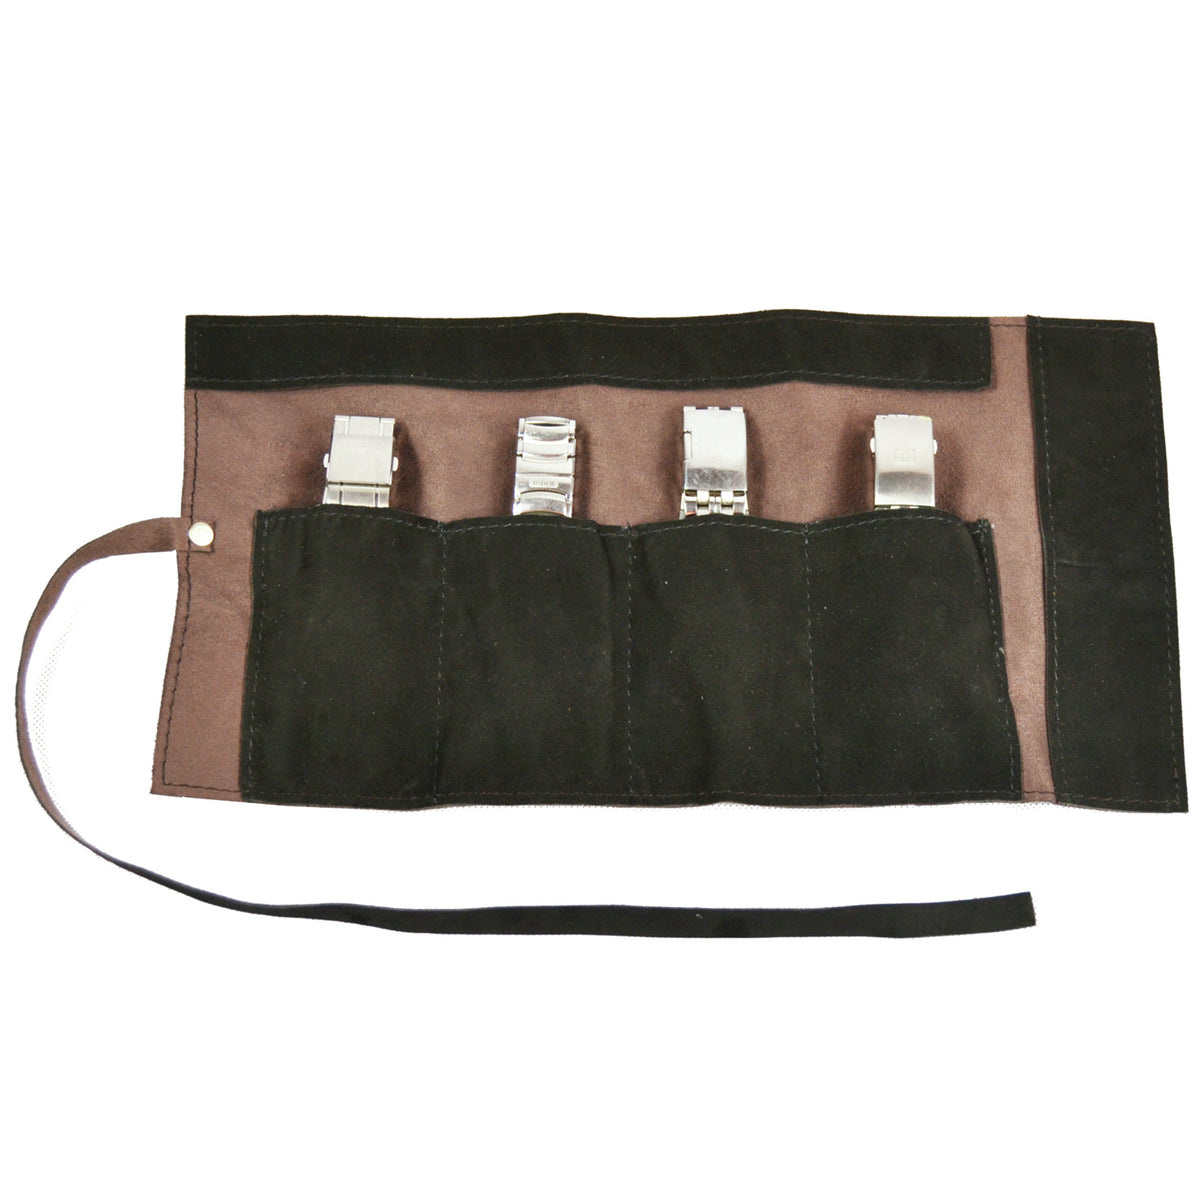 Delsey 4 Slot Leather Watch Pouch - Notbrand